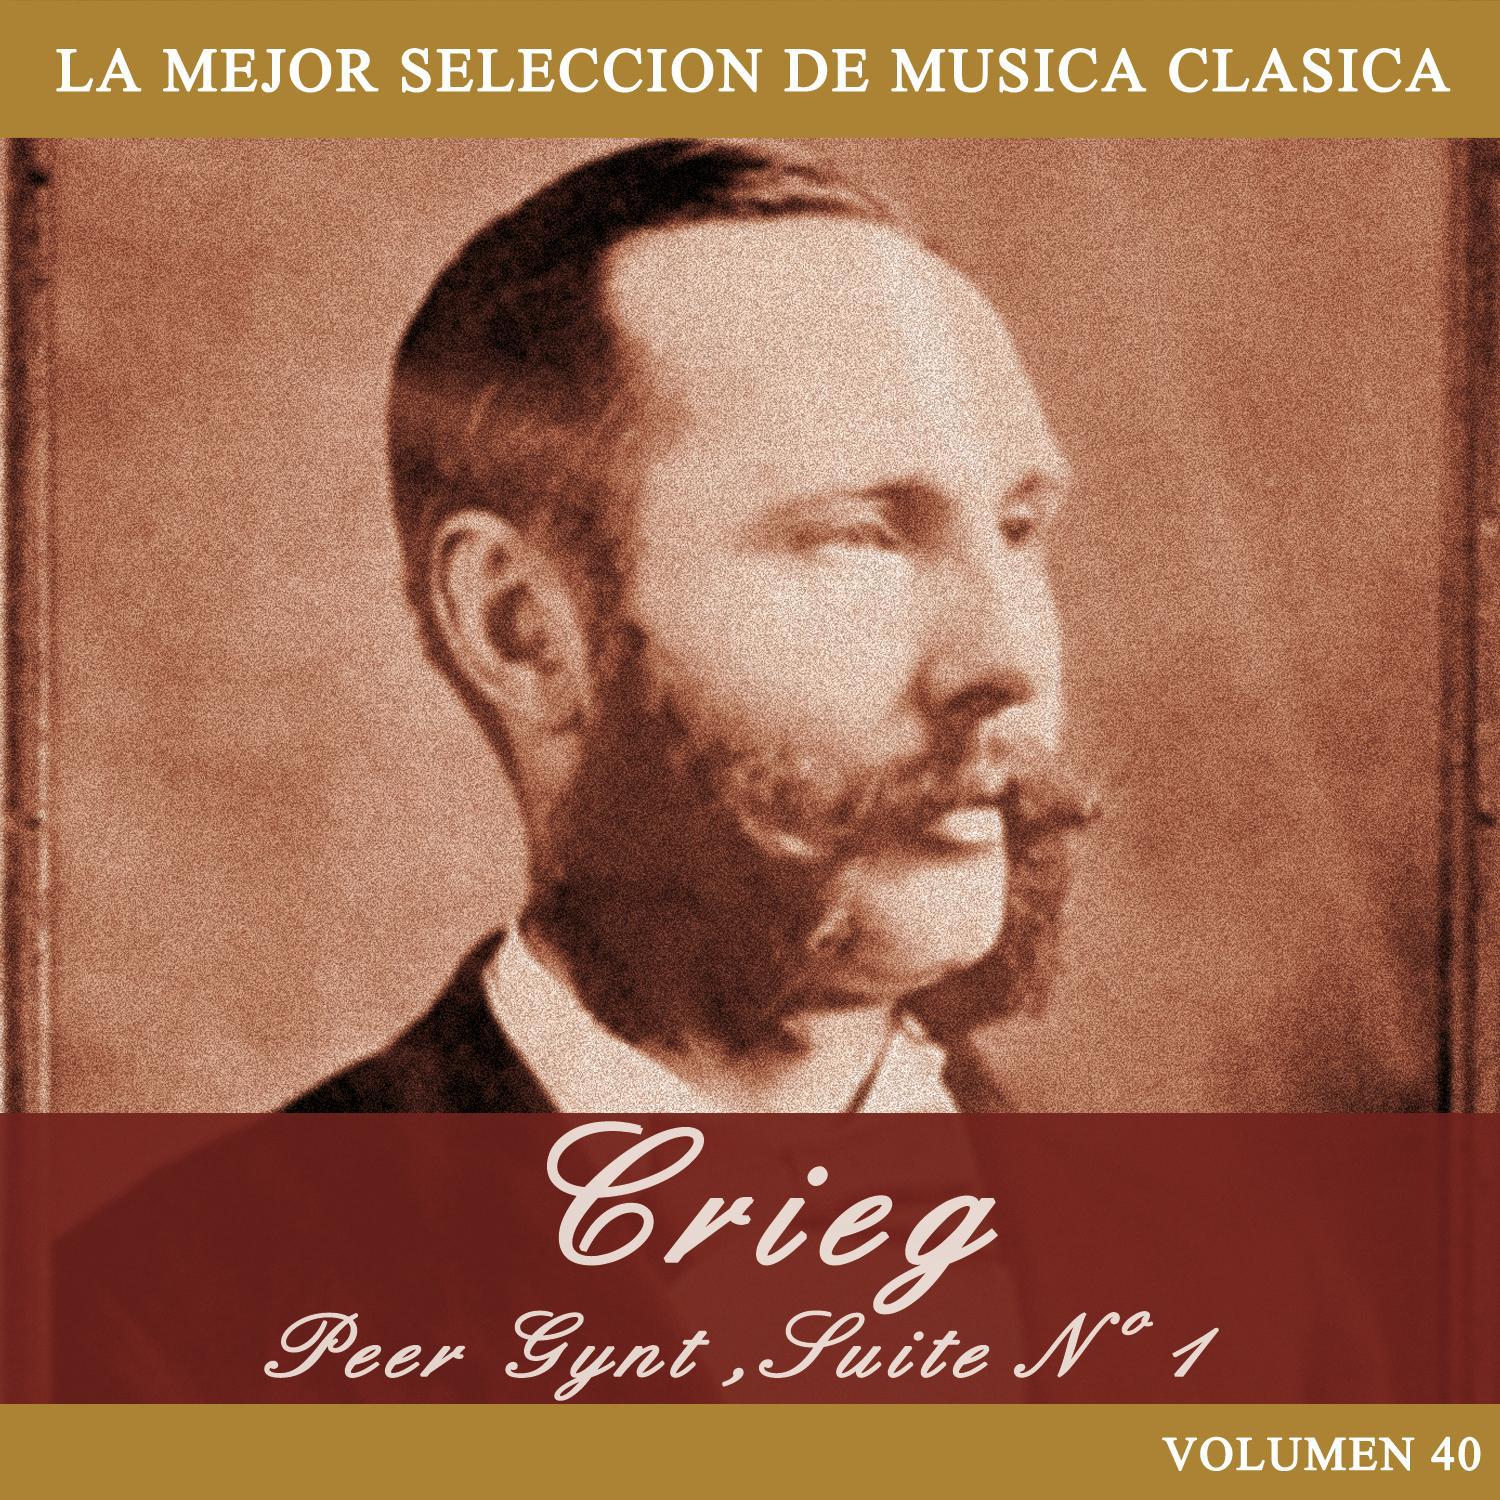 Perry Gynt, Suite No. 2 Op. 55: Danza Arabe